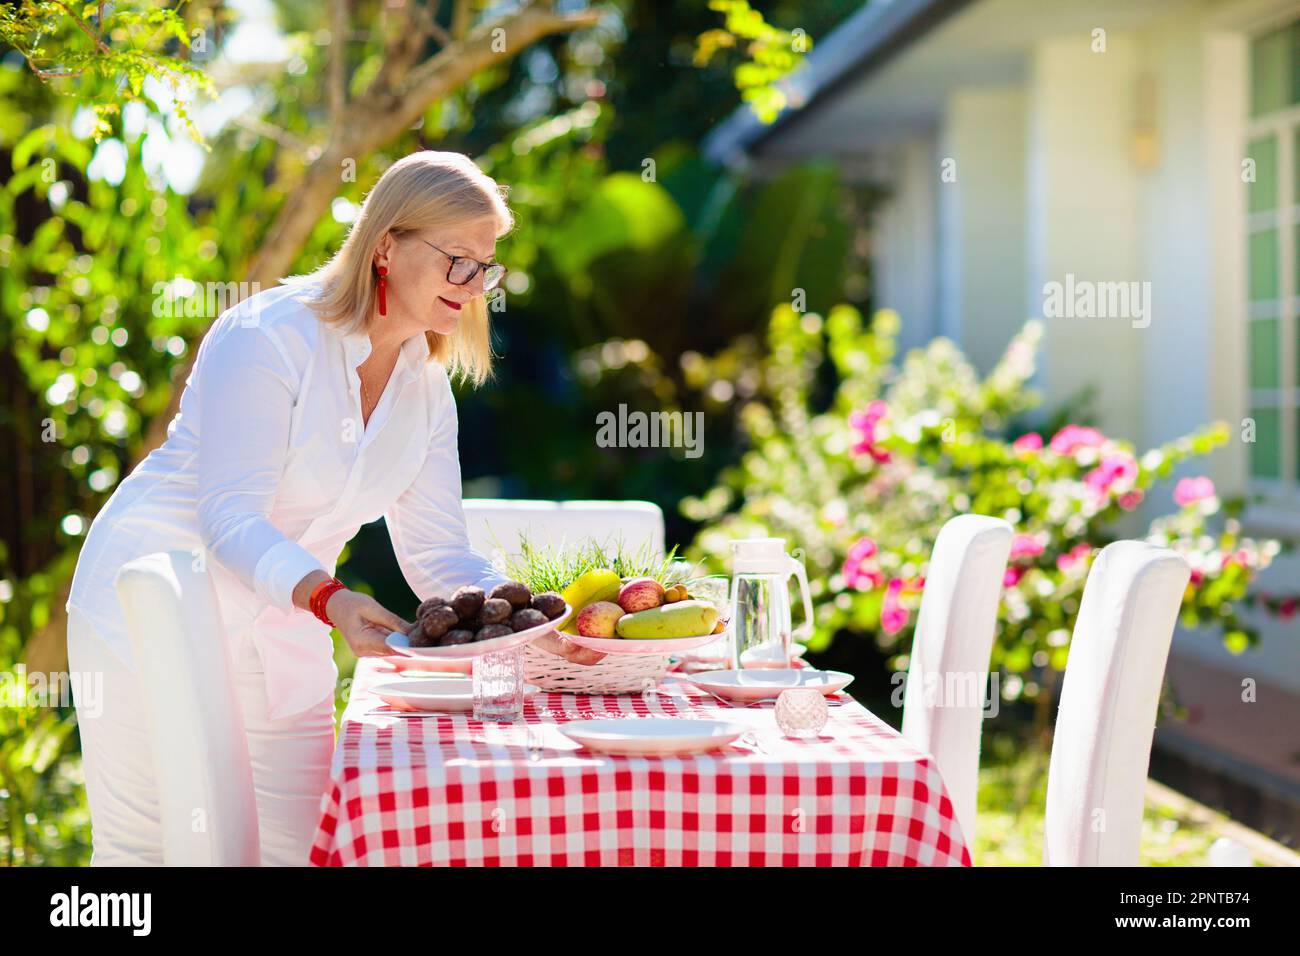 Woman setting table outdoors. Garden summer fun. BBQ in sunny backyard. Senior lady cooking lunch. Party decoration. Female with fruit outdoor. Stock Photo